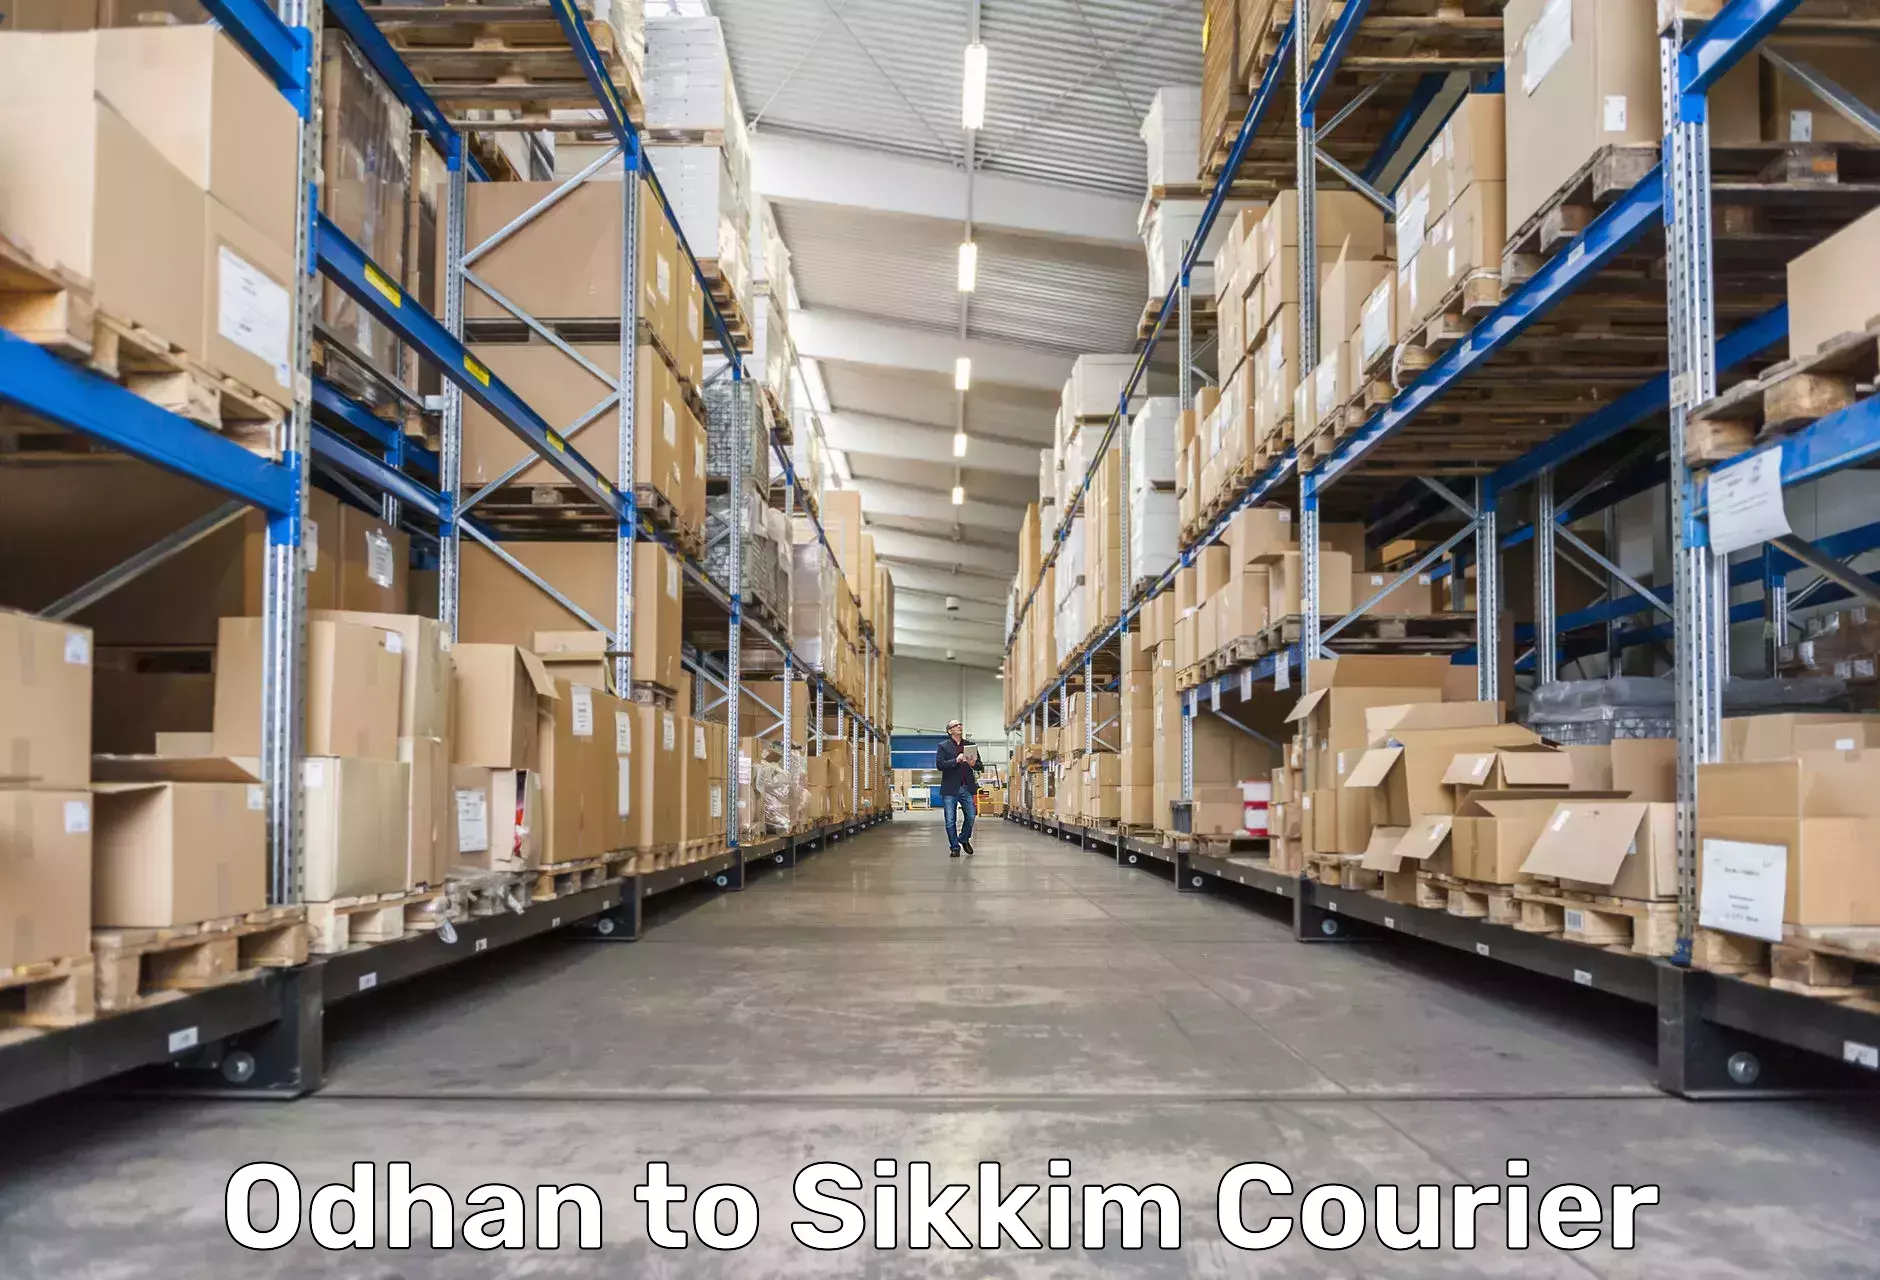 Cash on delivery service Odhan to Sikkim